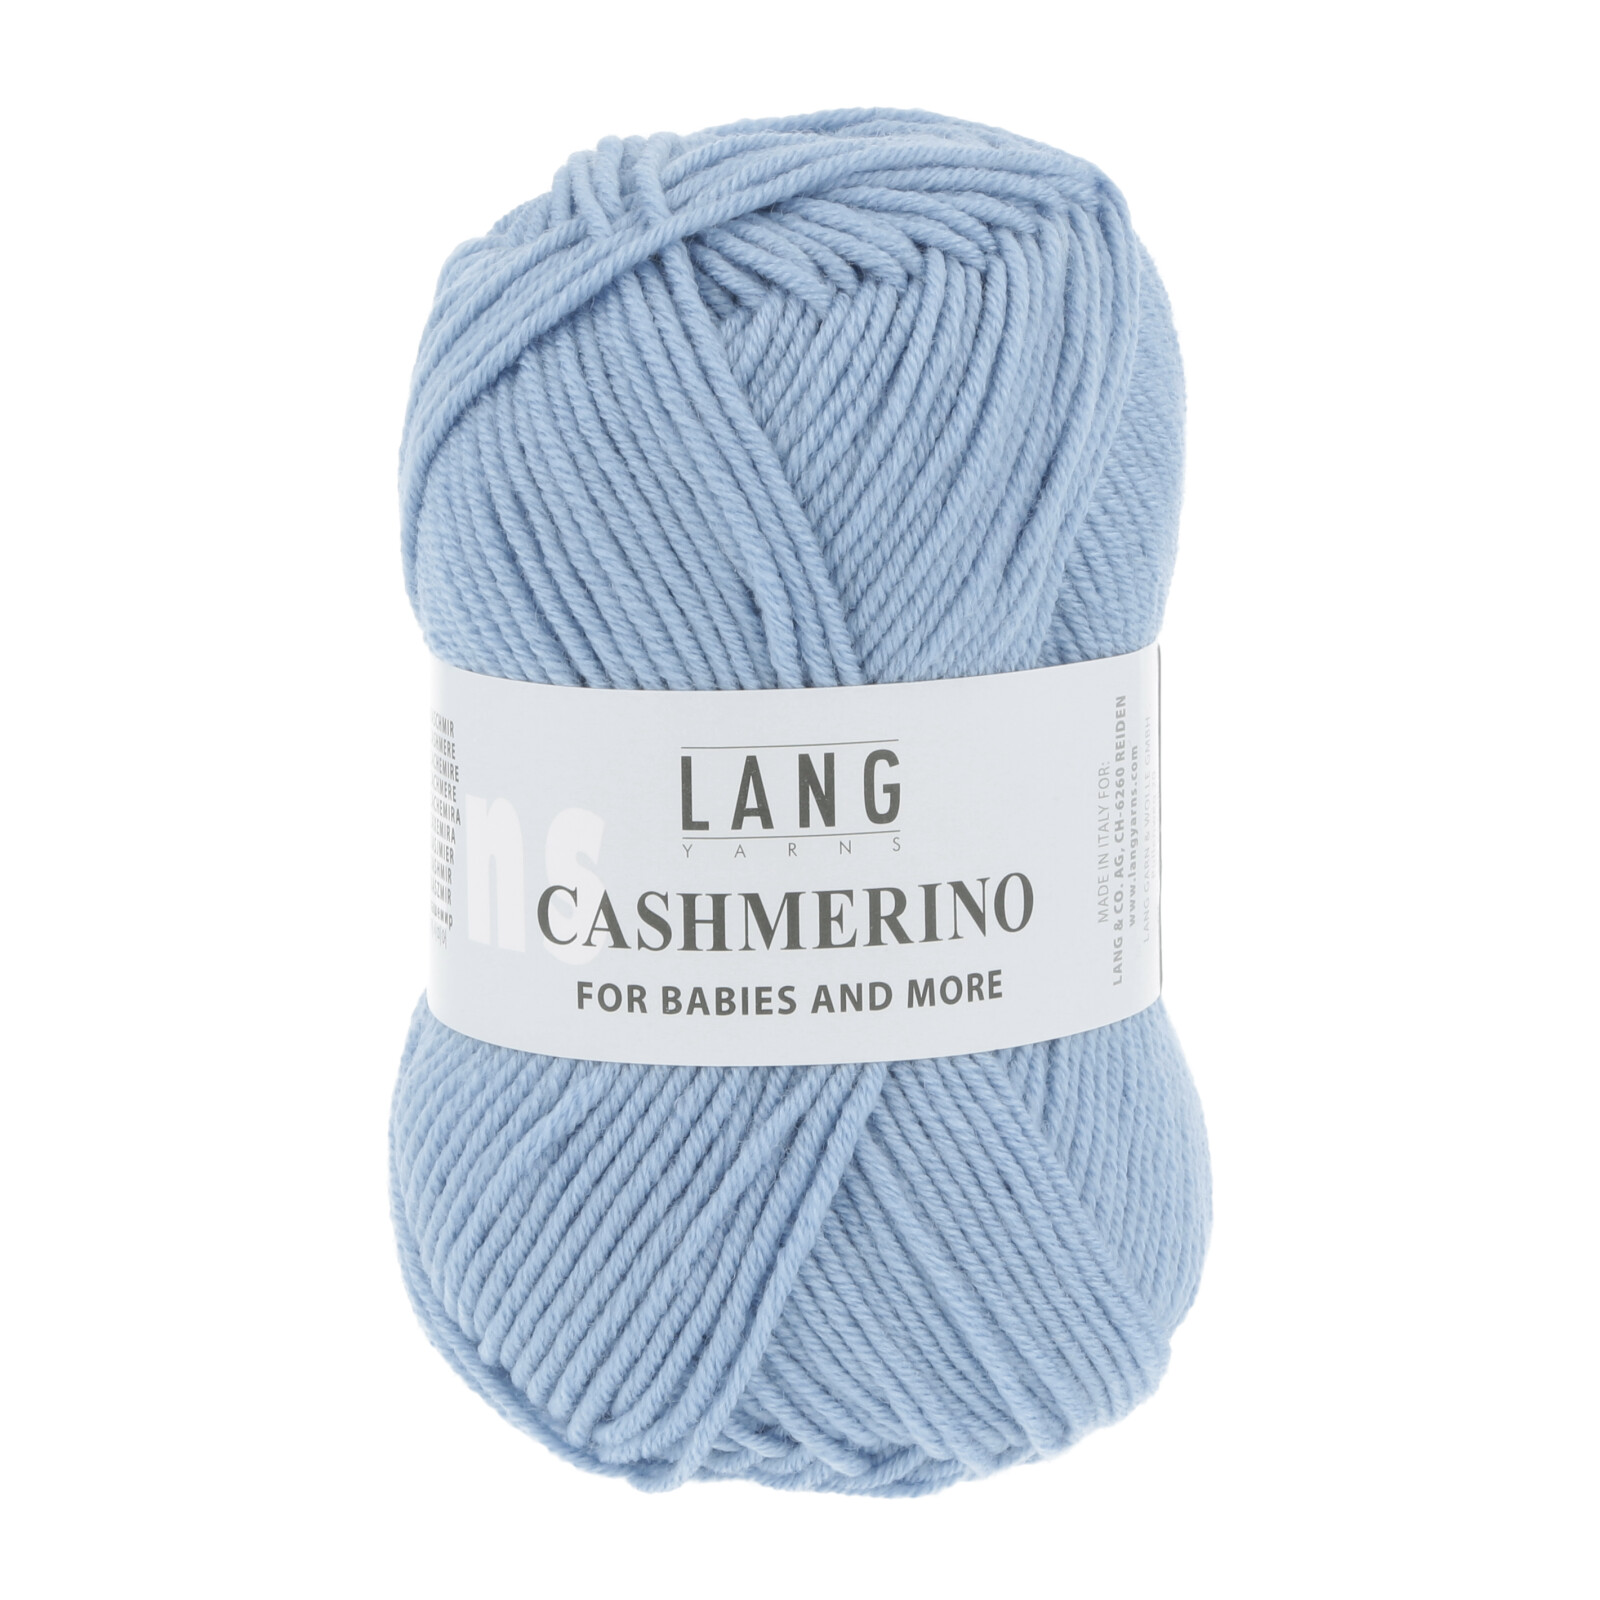 LANG Cashmerino For Babies And More